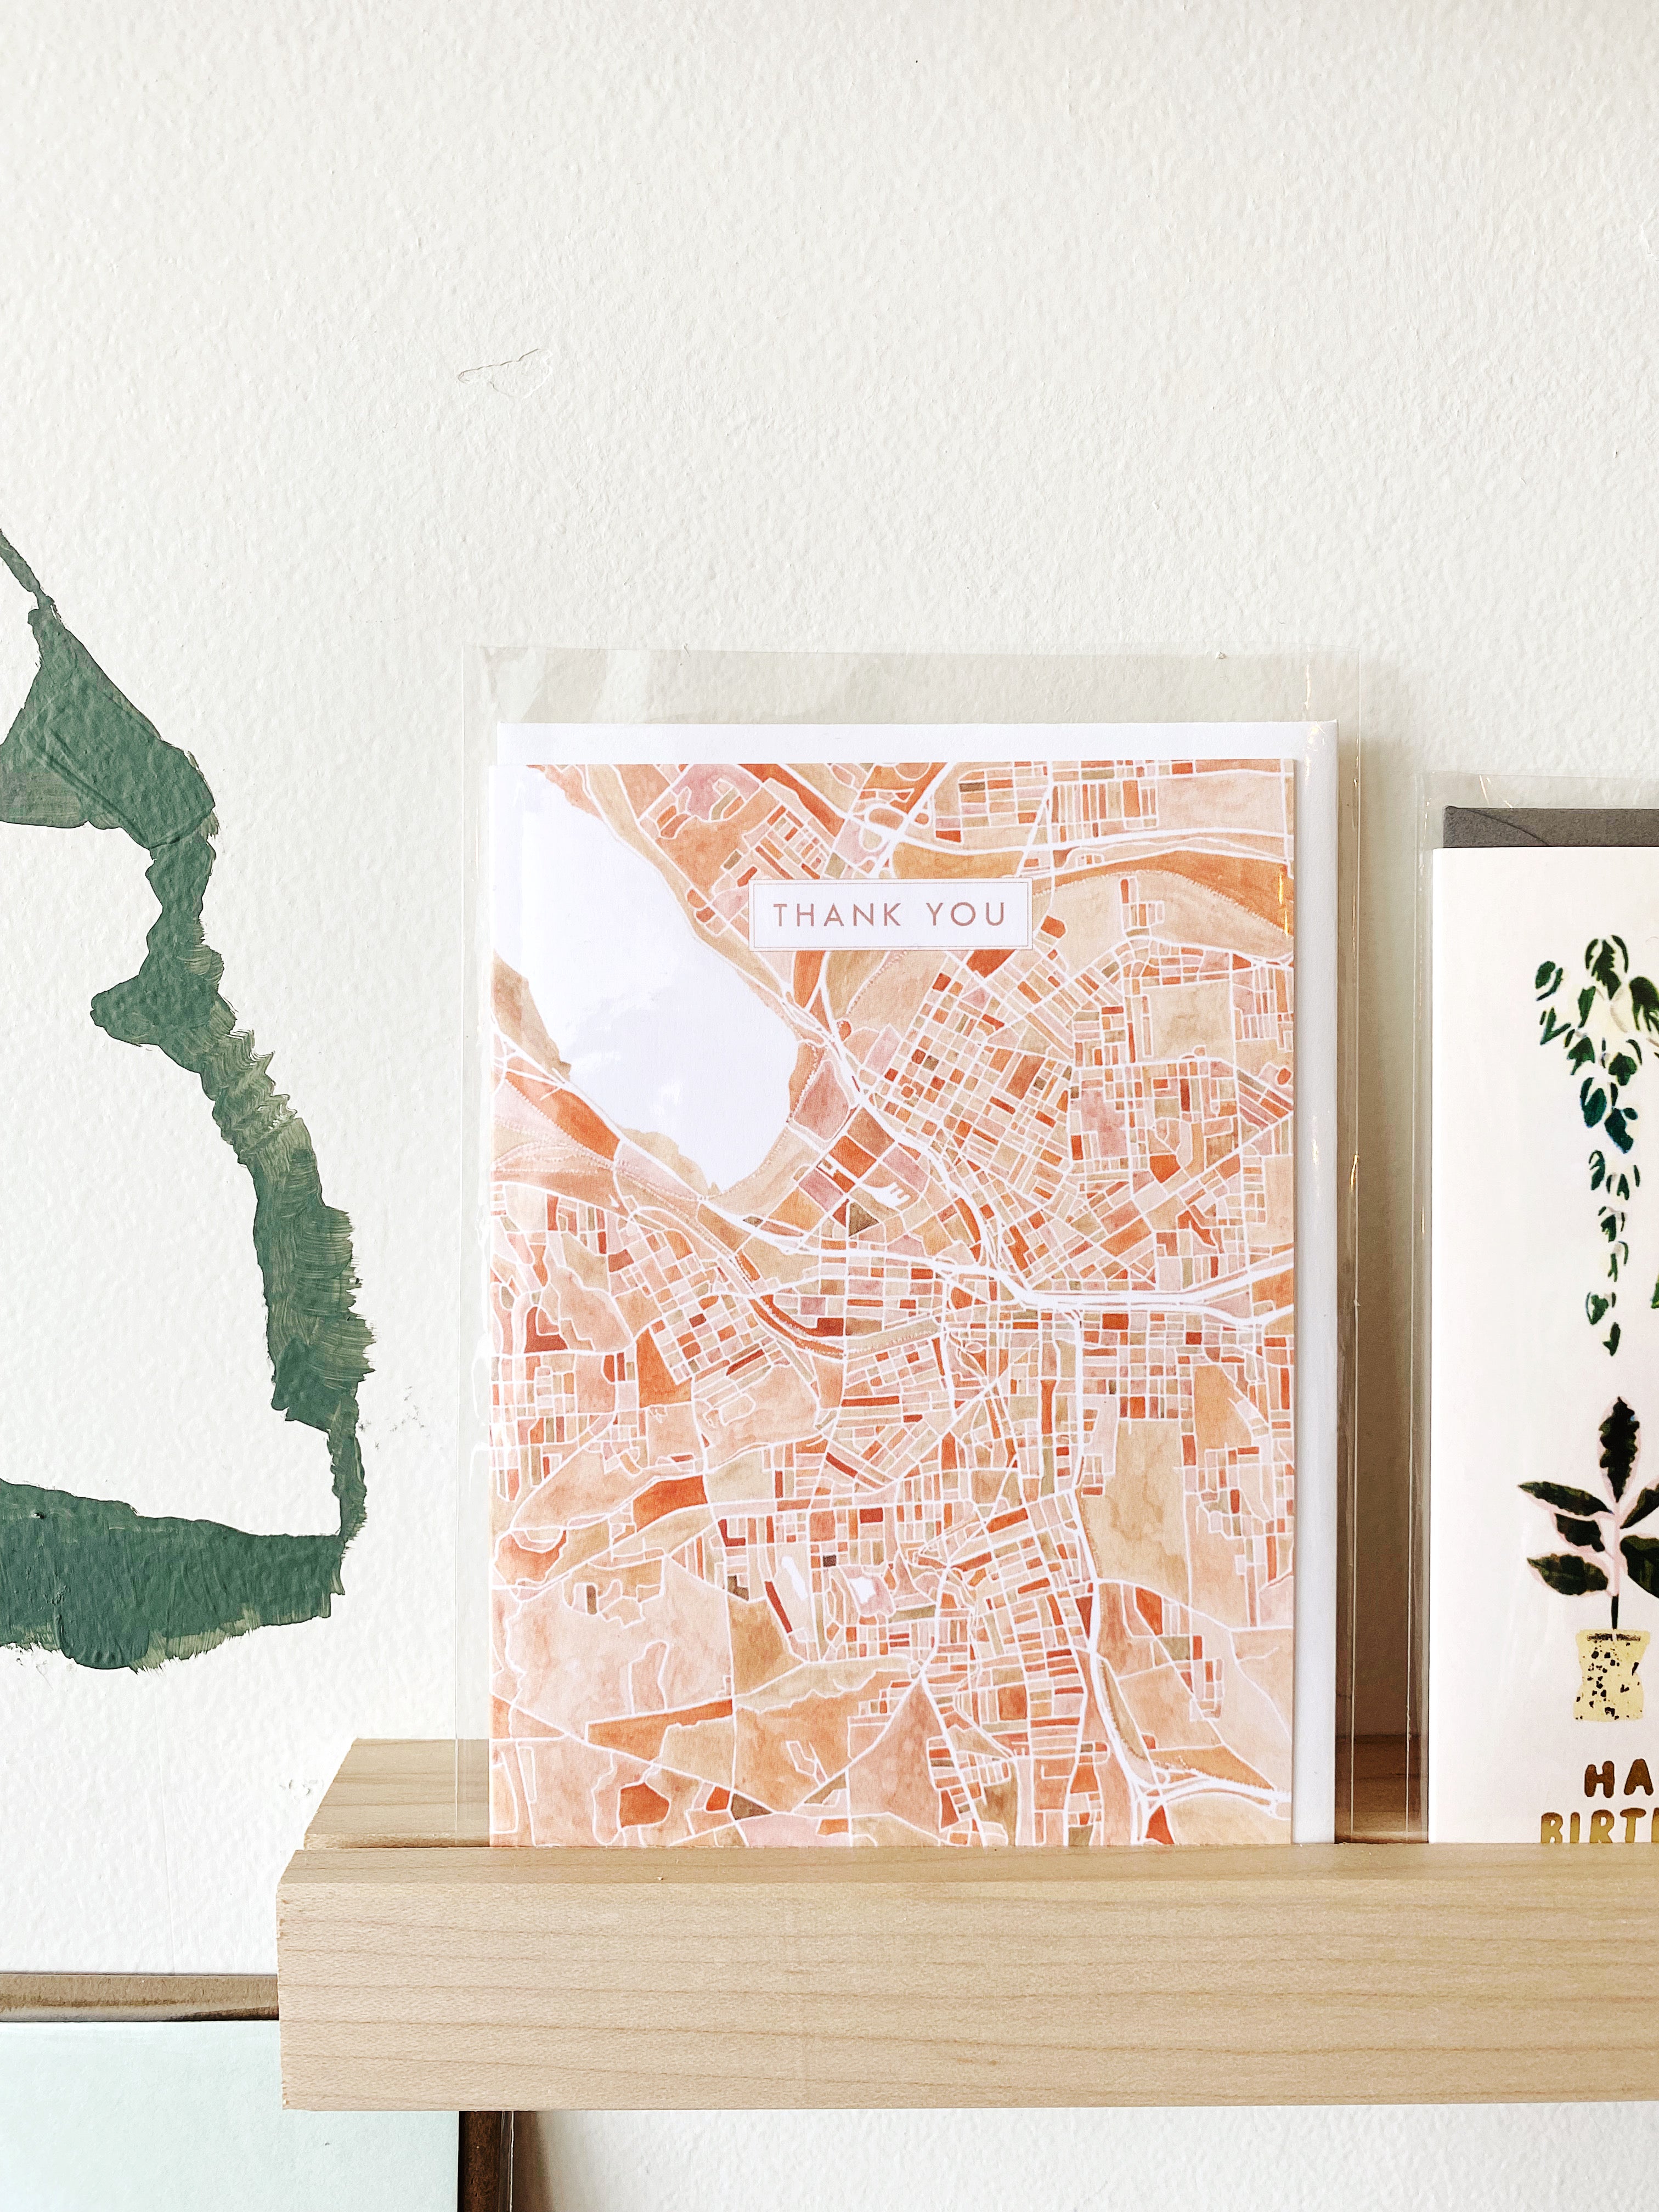 SYRACUSE New York Watercolor Map - thank you card